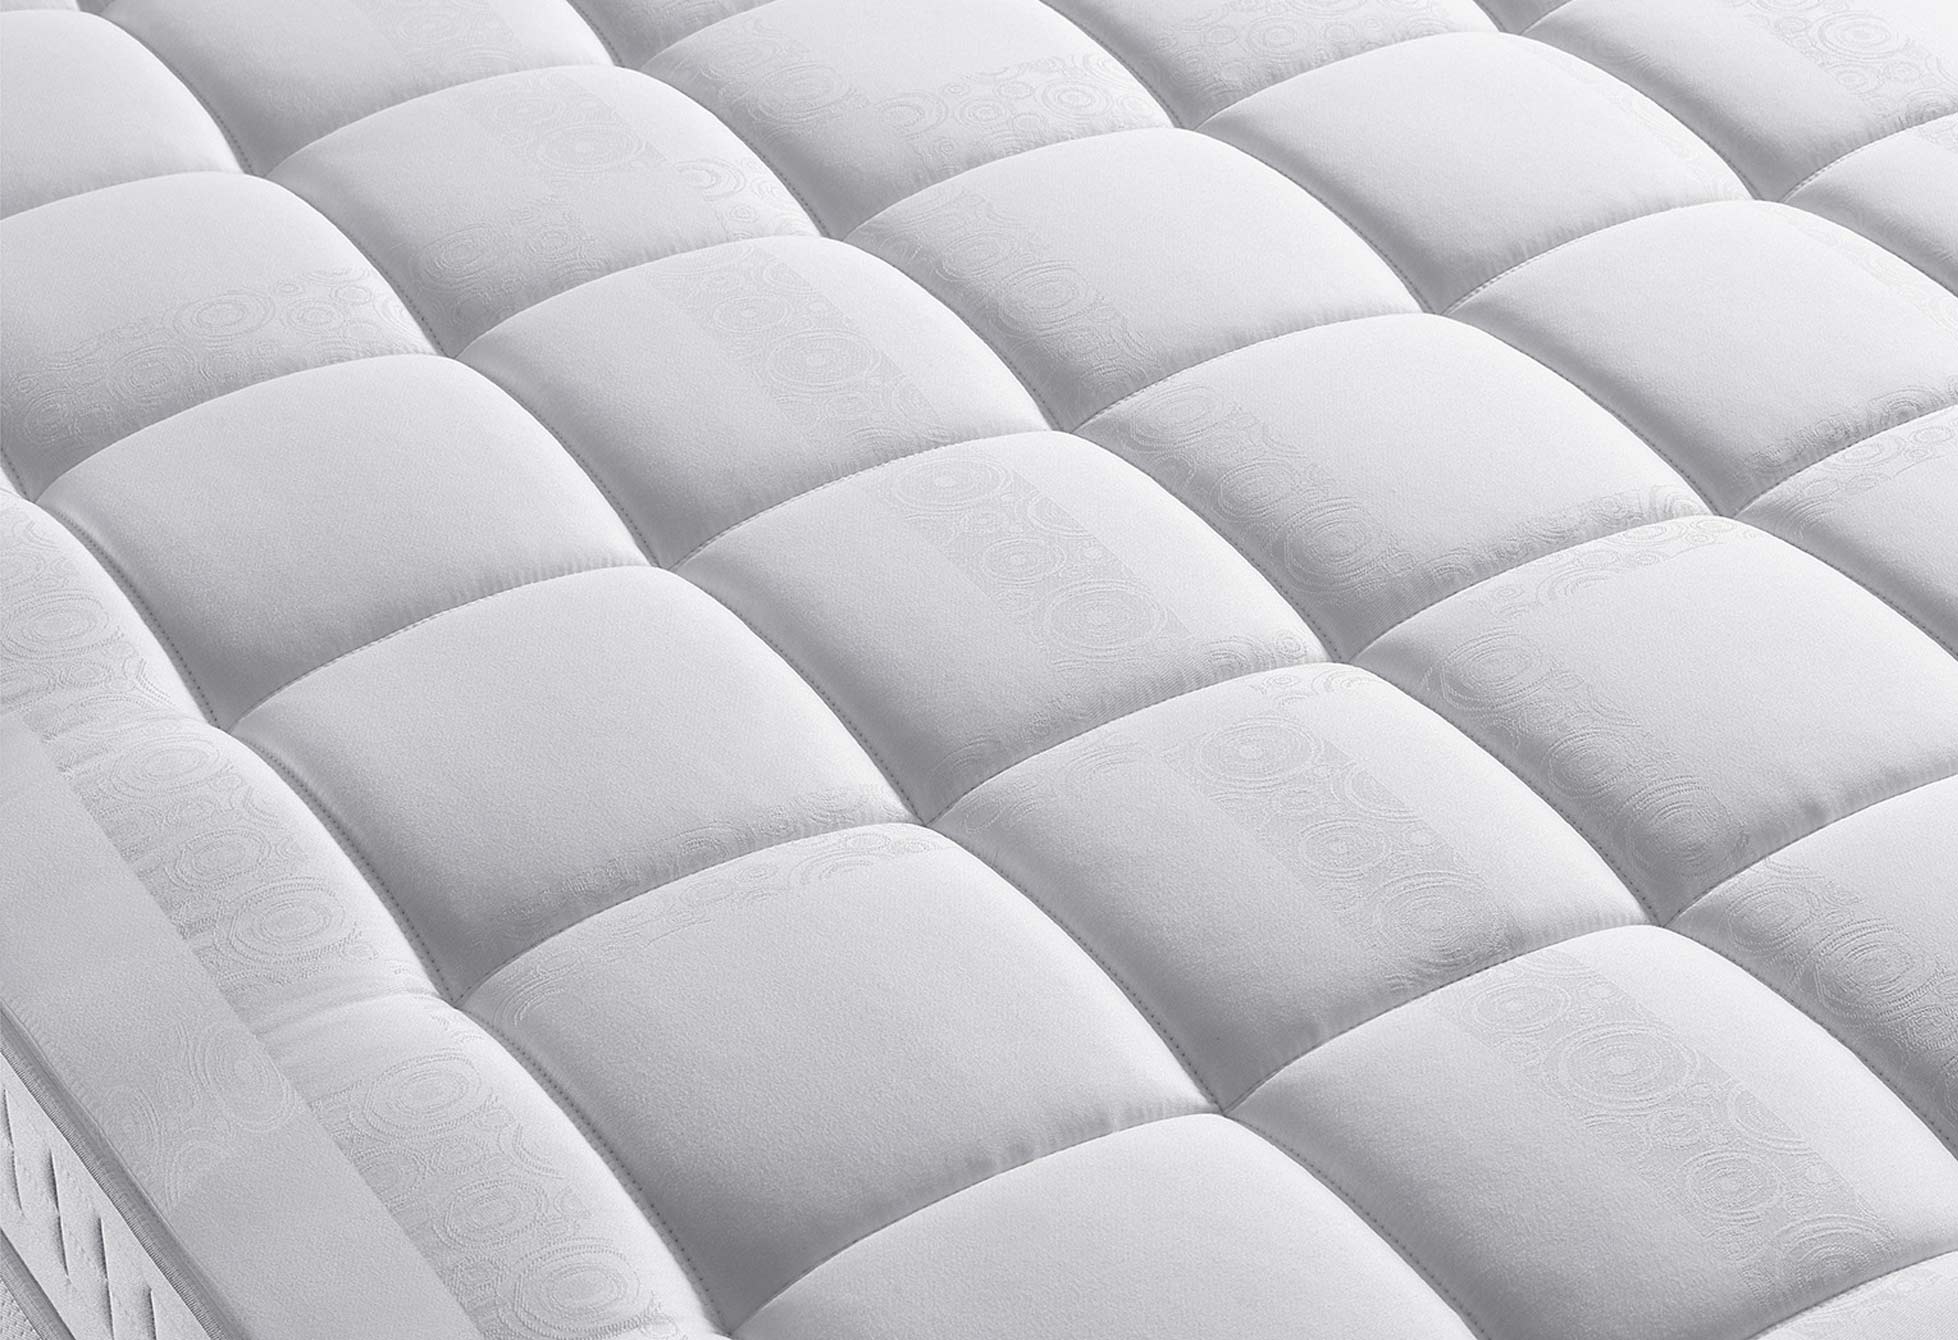 Matelas Ressorts Simmons FIRST S5  160x200 (Queen size)